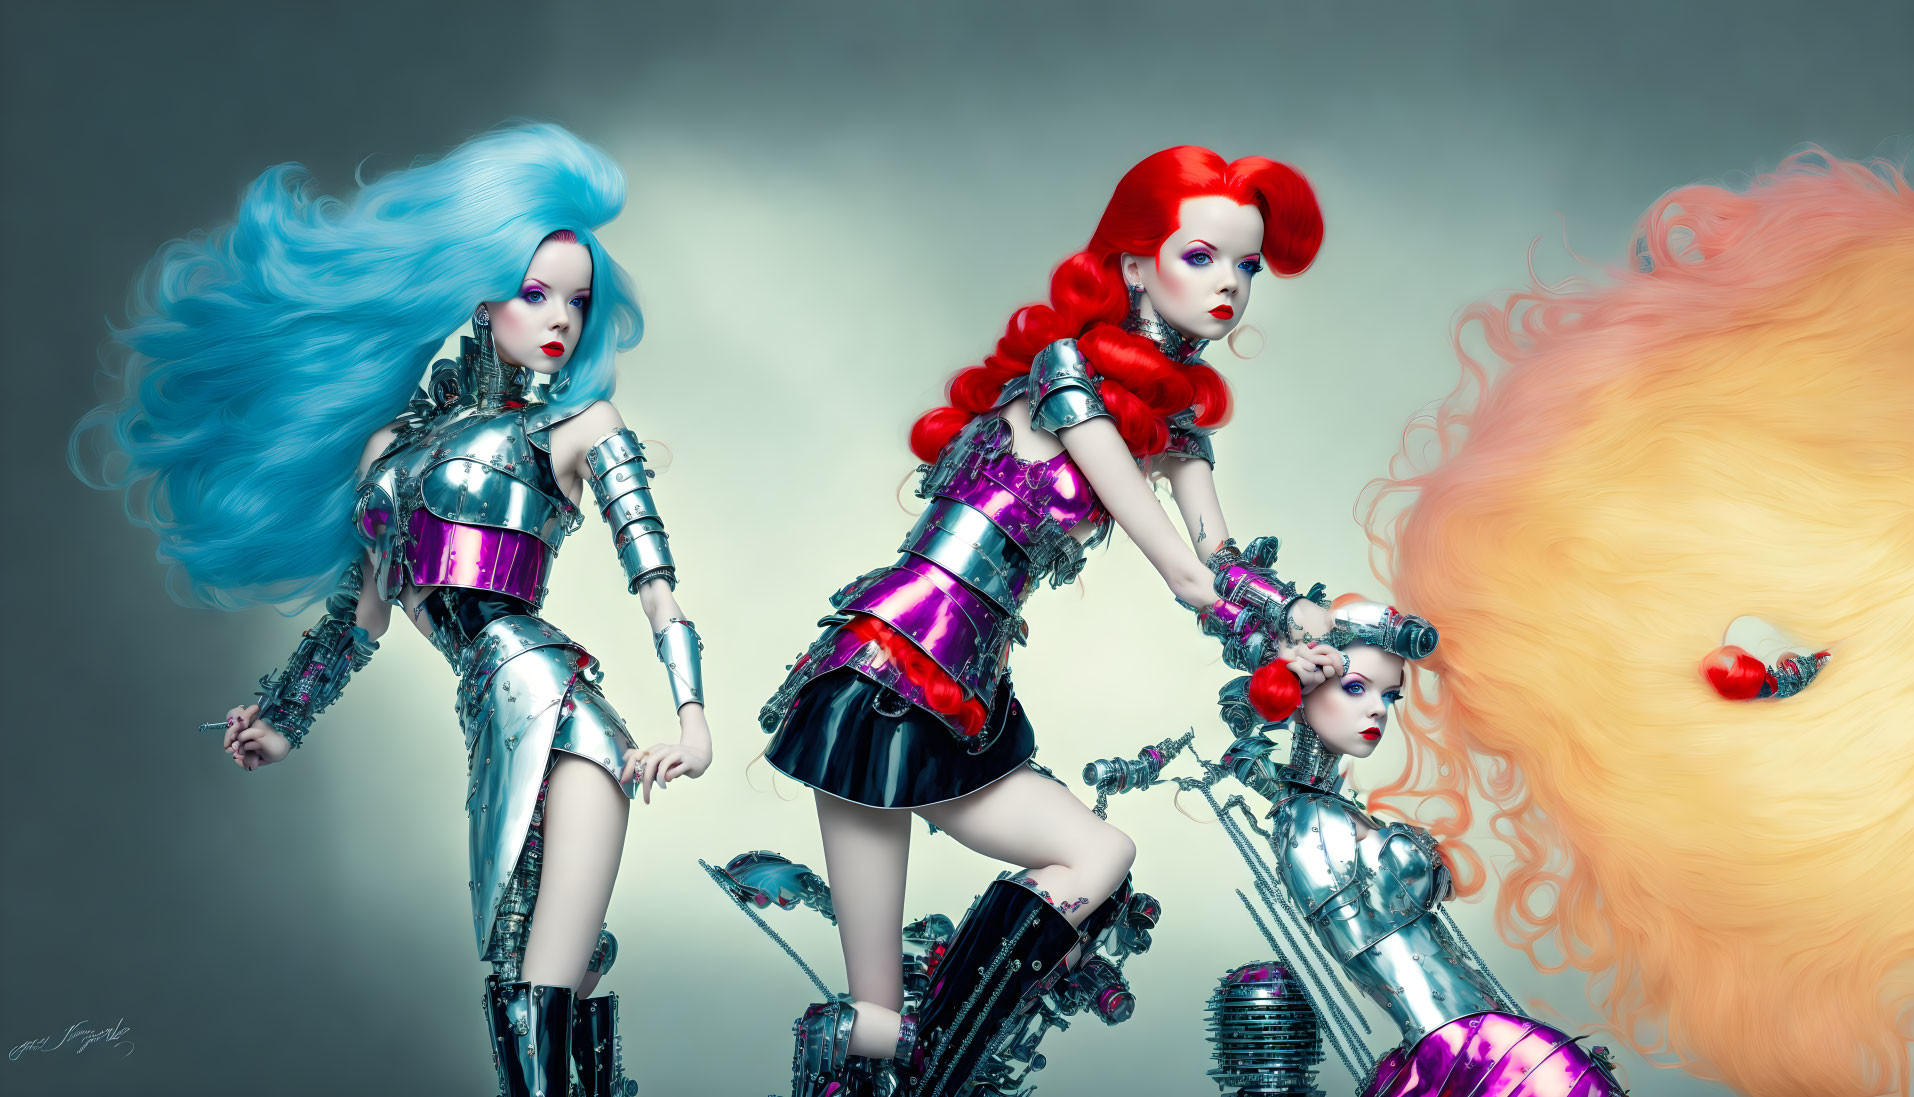 Vibrant blue, red, and yellow hair on futuristic female figures in metallic armor pose against muted